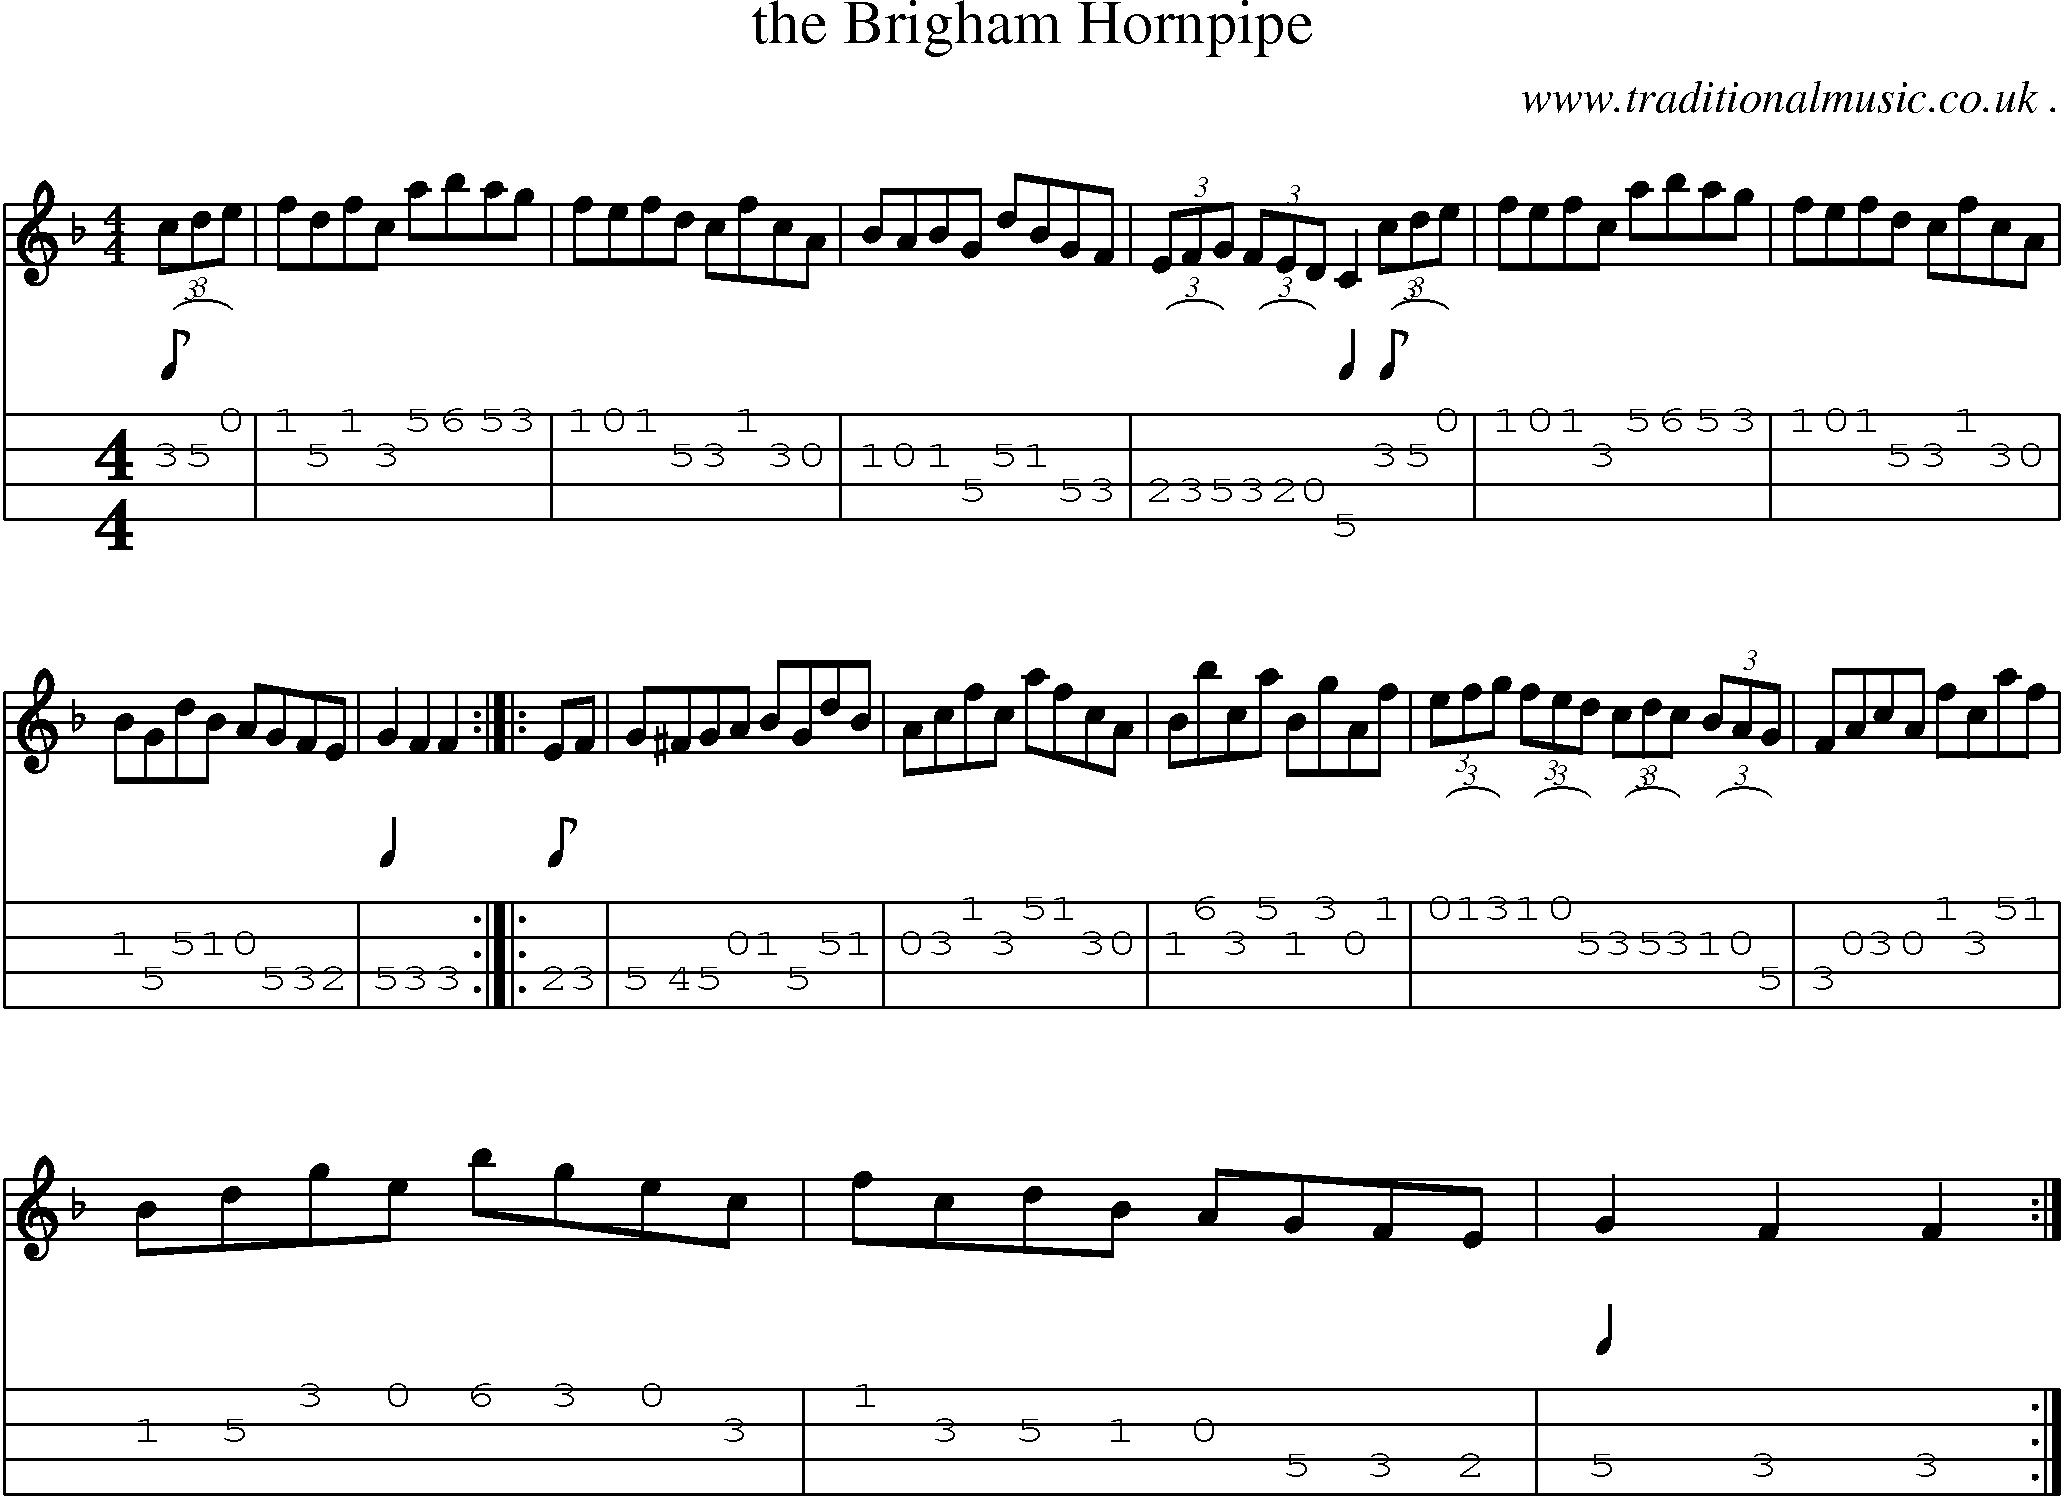 Sheet-Music and Mandolin Tabs for The Brigham Hornpipe